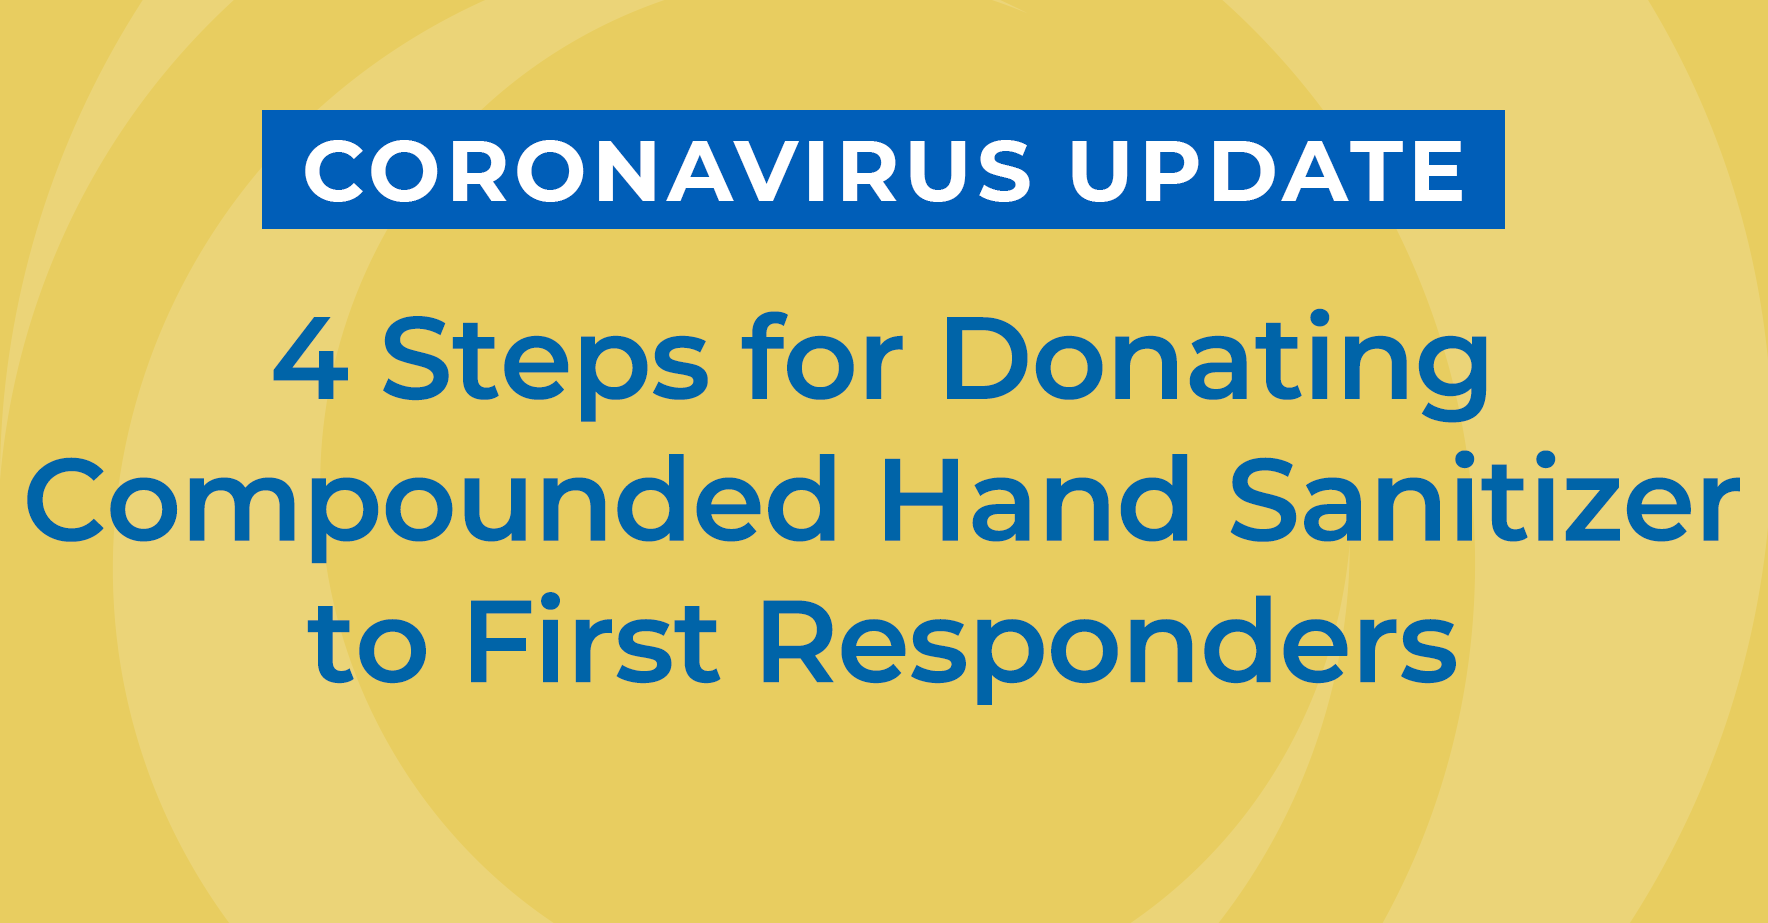 Coronavirus_Update_4_Steps_for_Donating_Compounded_Hand_Sanitizer_to_First_Responders.png